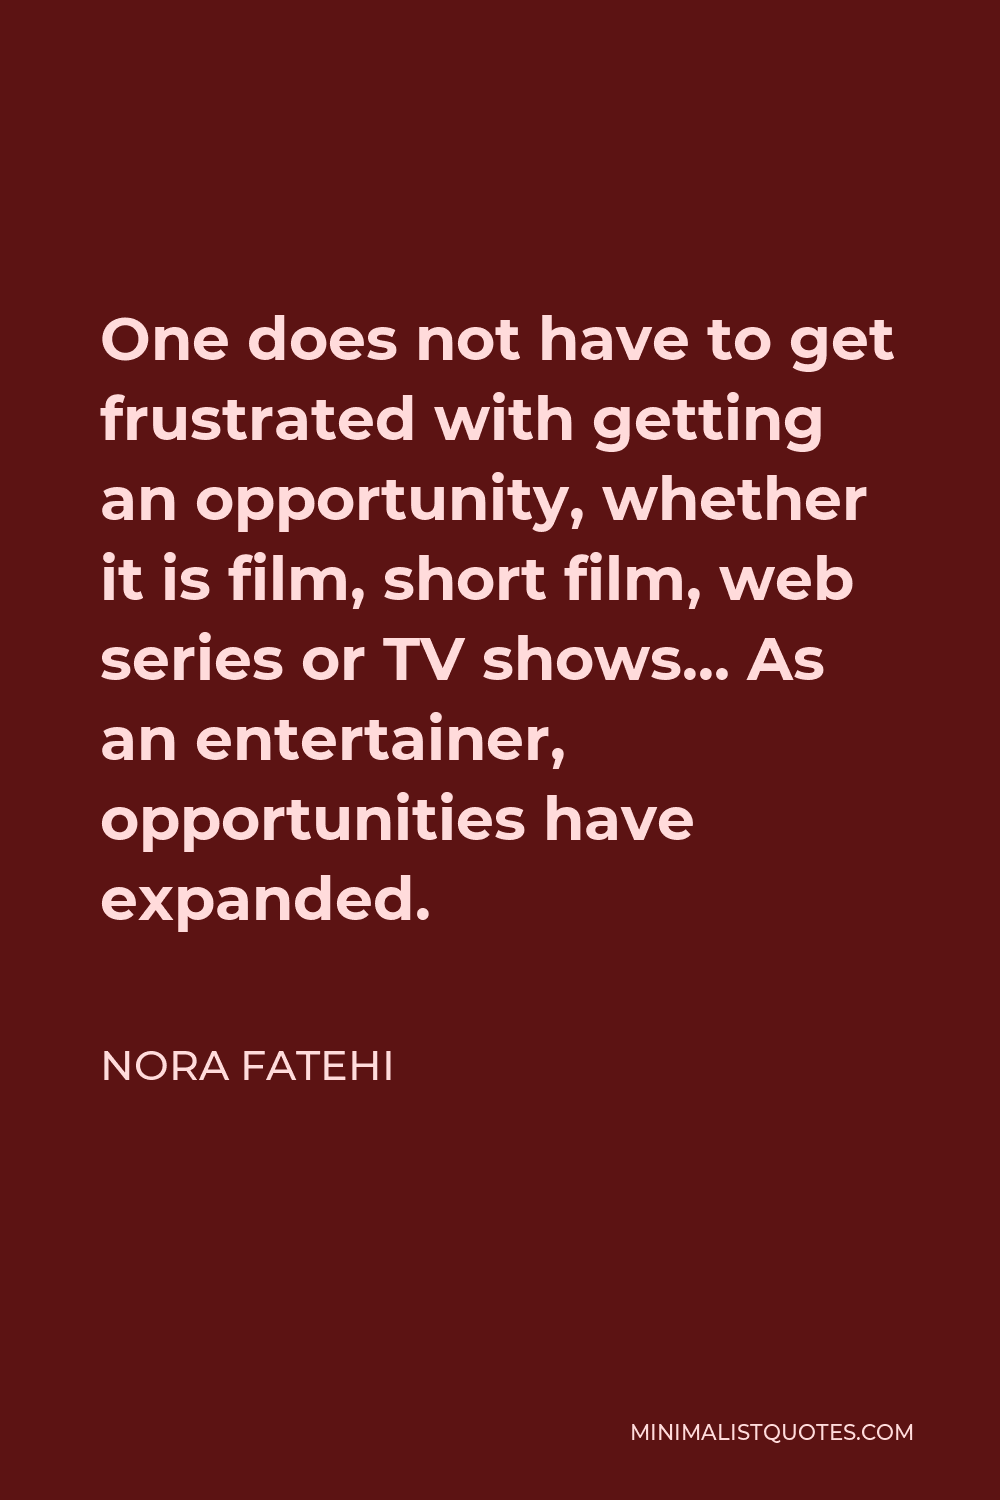 Nora Fatehi Quote - One does not have to get frustrated with getting an opportunity, whether it is film, short film, web series or TV shows… As an entertainer, opportunities have expanded.